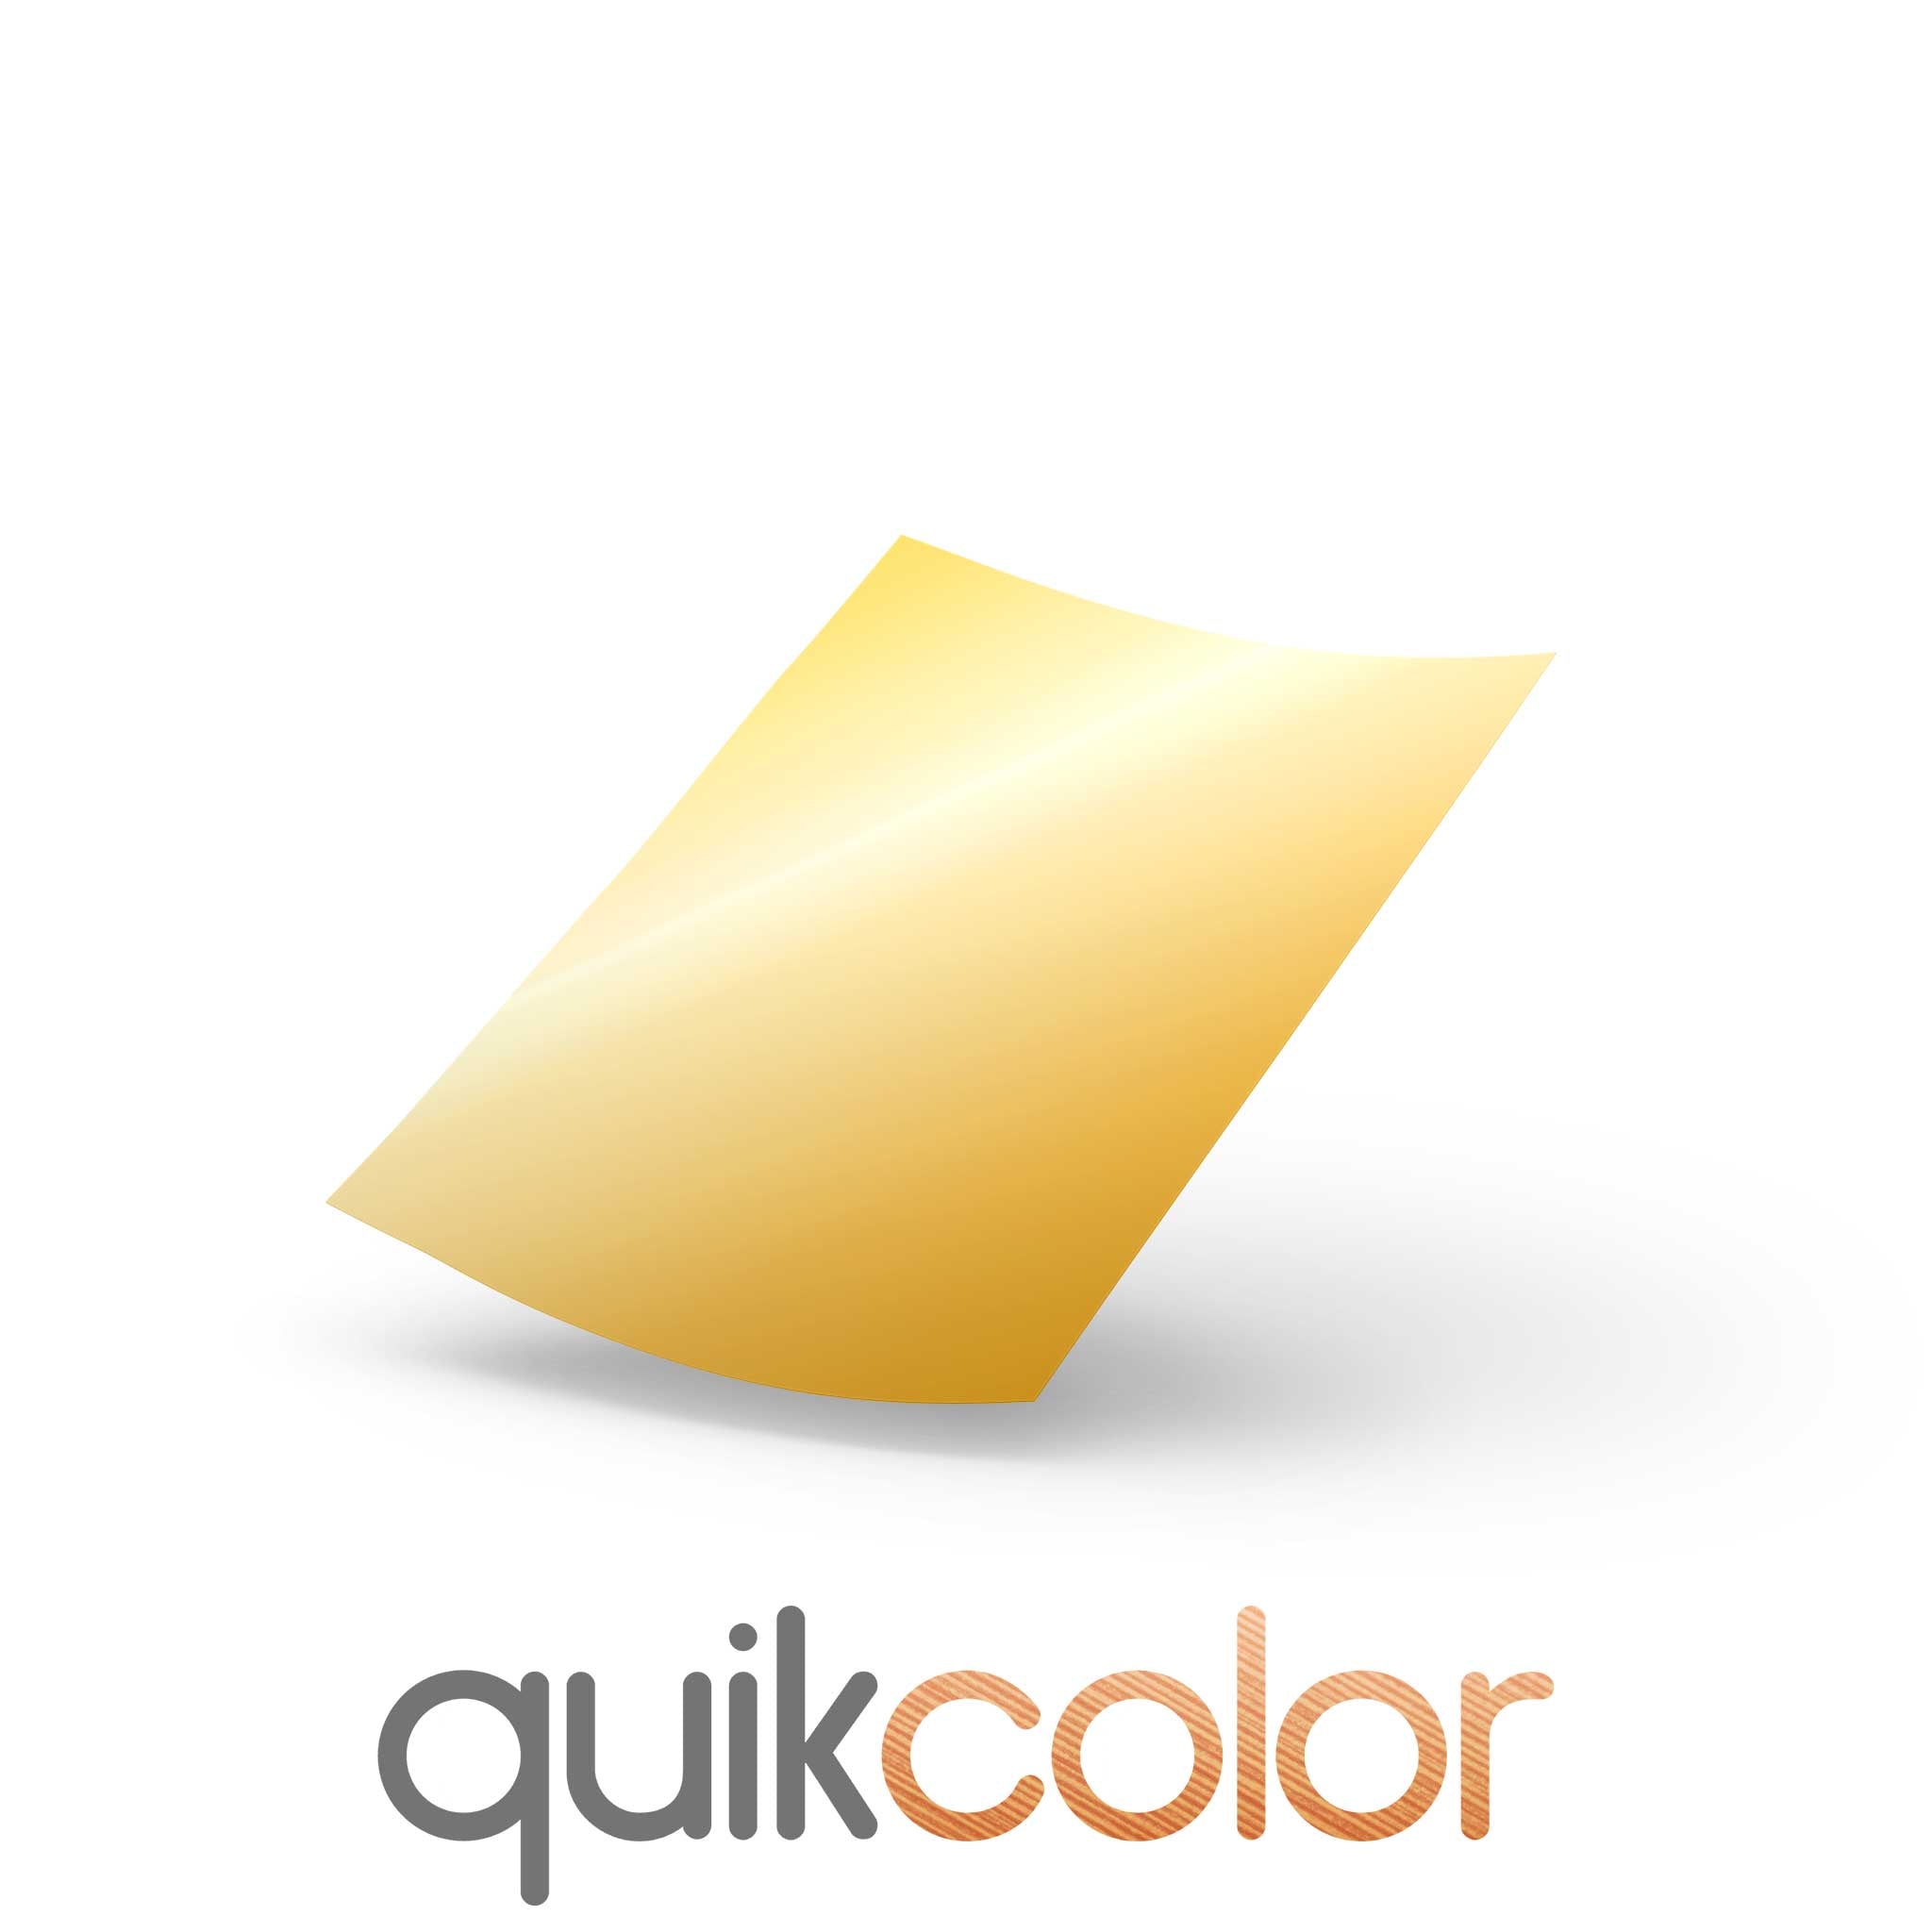 Quikcolor Metallic Hard Surface 1-Step Transfer Media for Cardboard, Paper and Wood